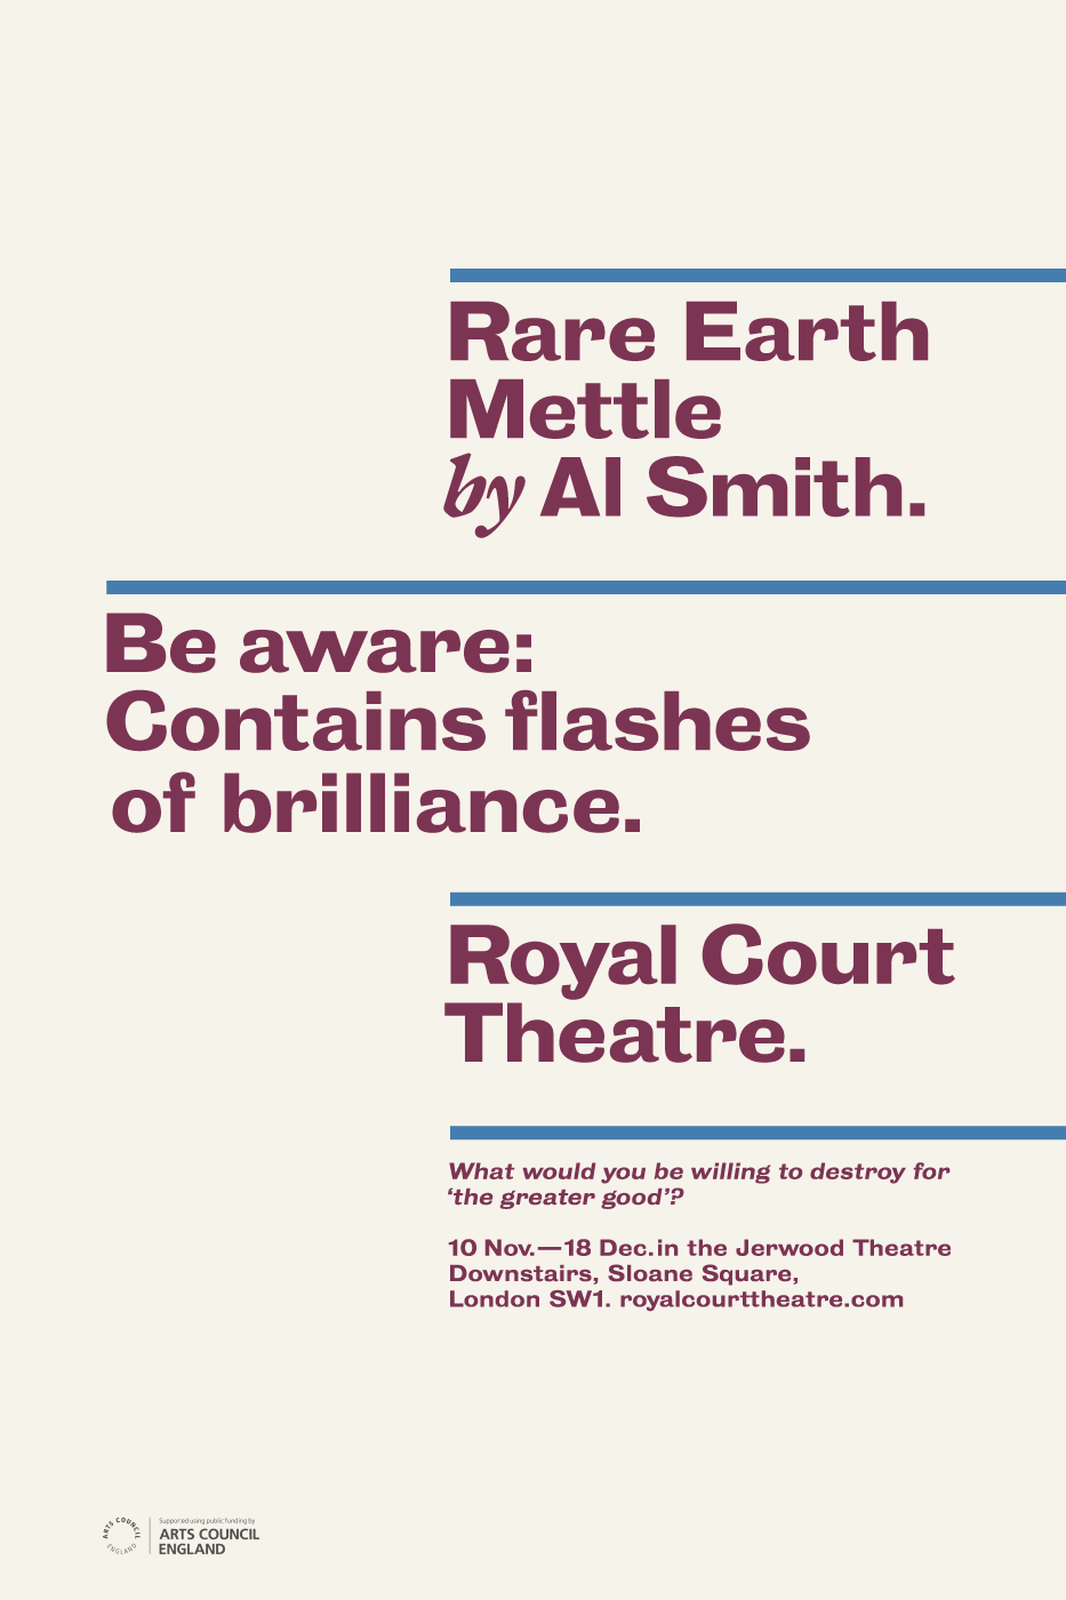 paul_belford_ltd_royal_court_theatre_rare_earth_mettle.png